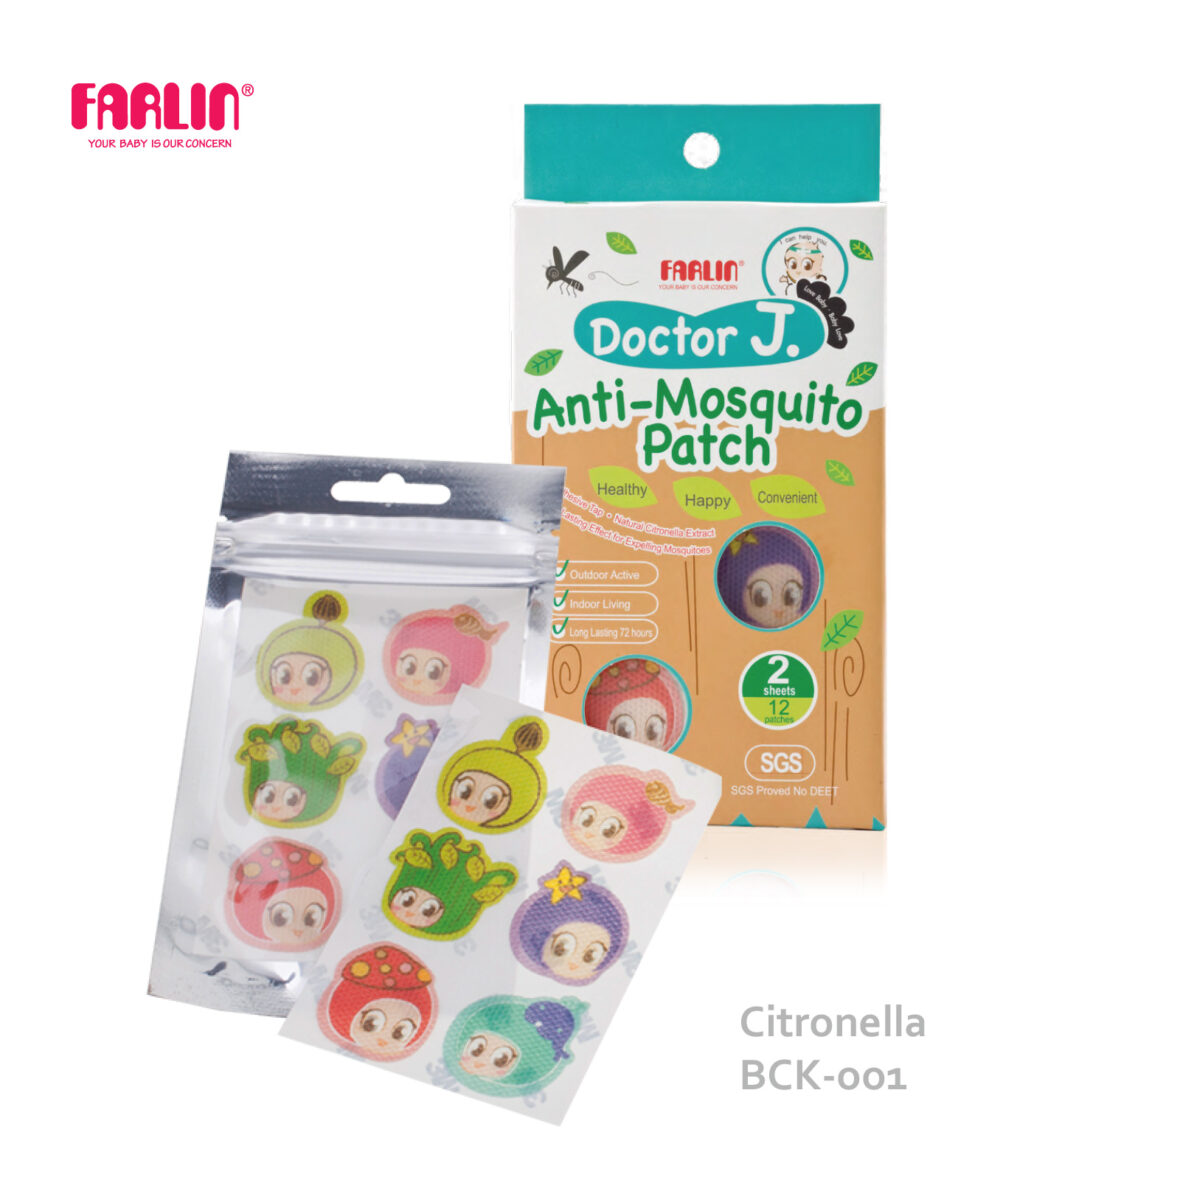 Farlin Doctor J. Anti-Mosquito Patch